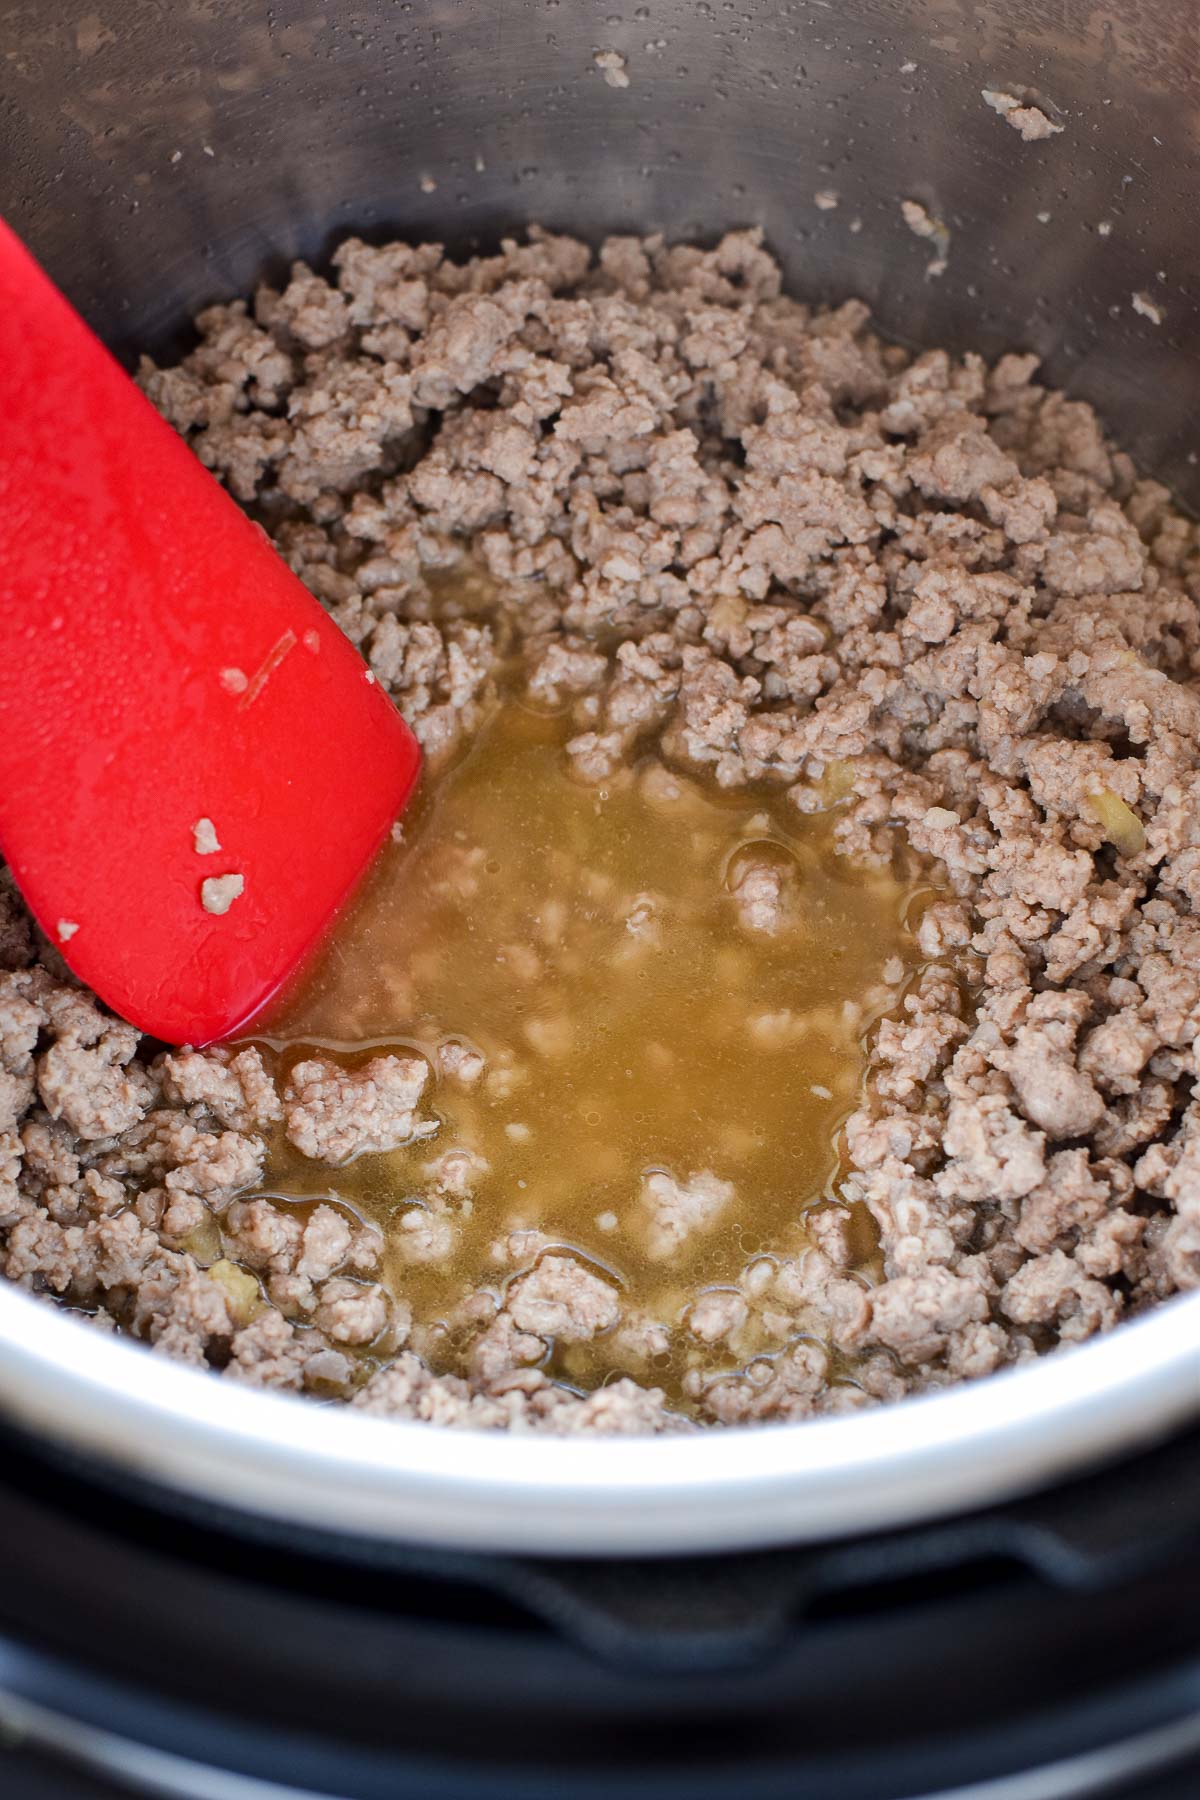 a spatula scraping the bottom of an instant pot clean using chicken bone broth after sautéing ground pork and ginger.